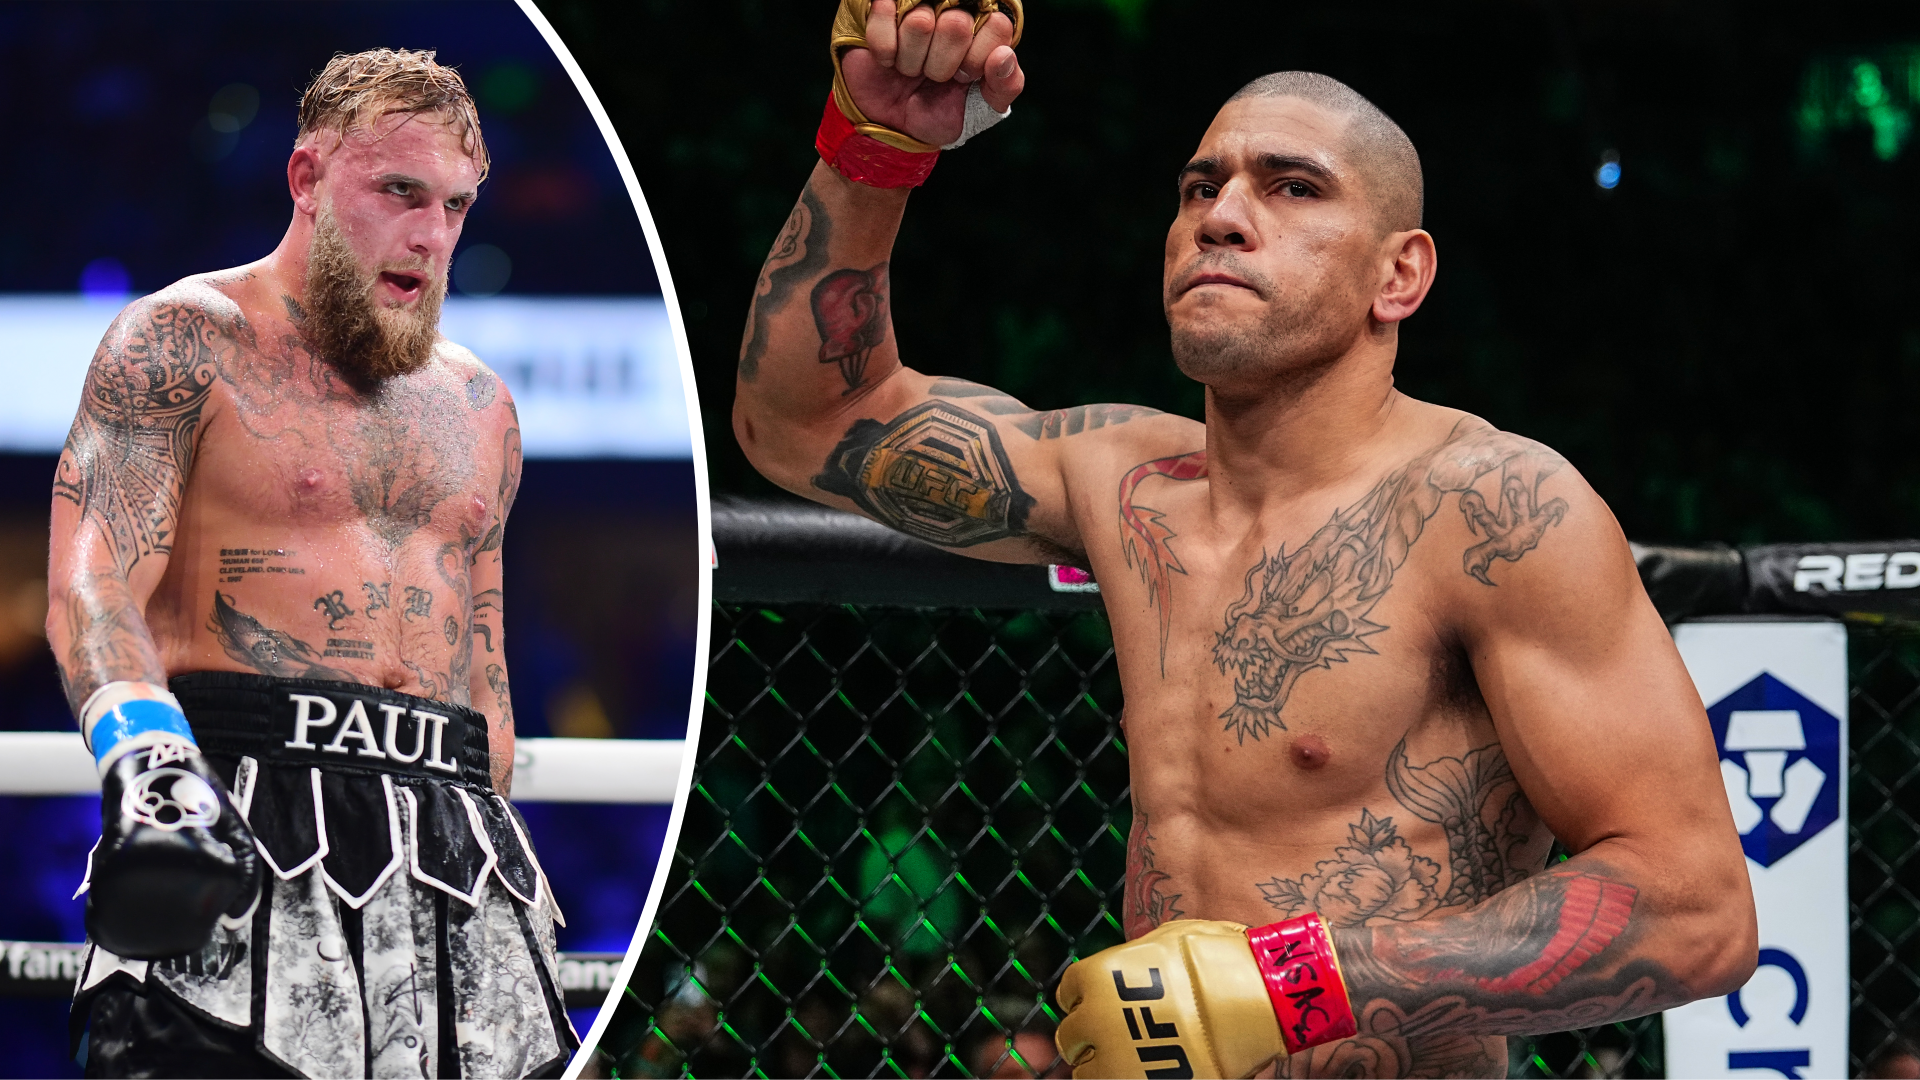 'Going to decapitate him': Jake Paul doubles down on bizarre challenge of 'scary' UFC champion Alex Pereira